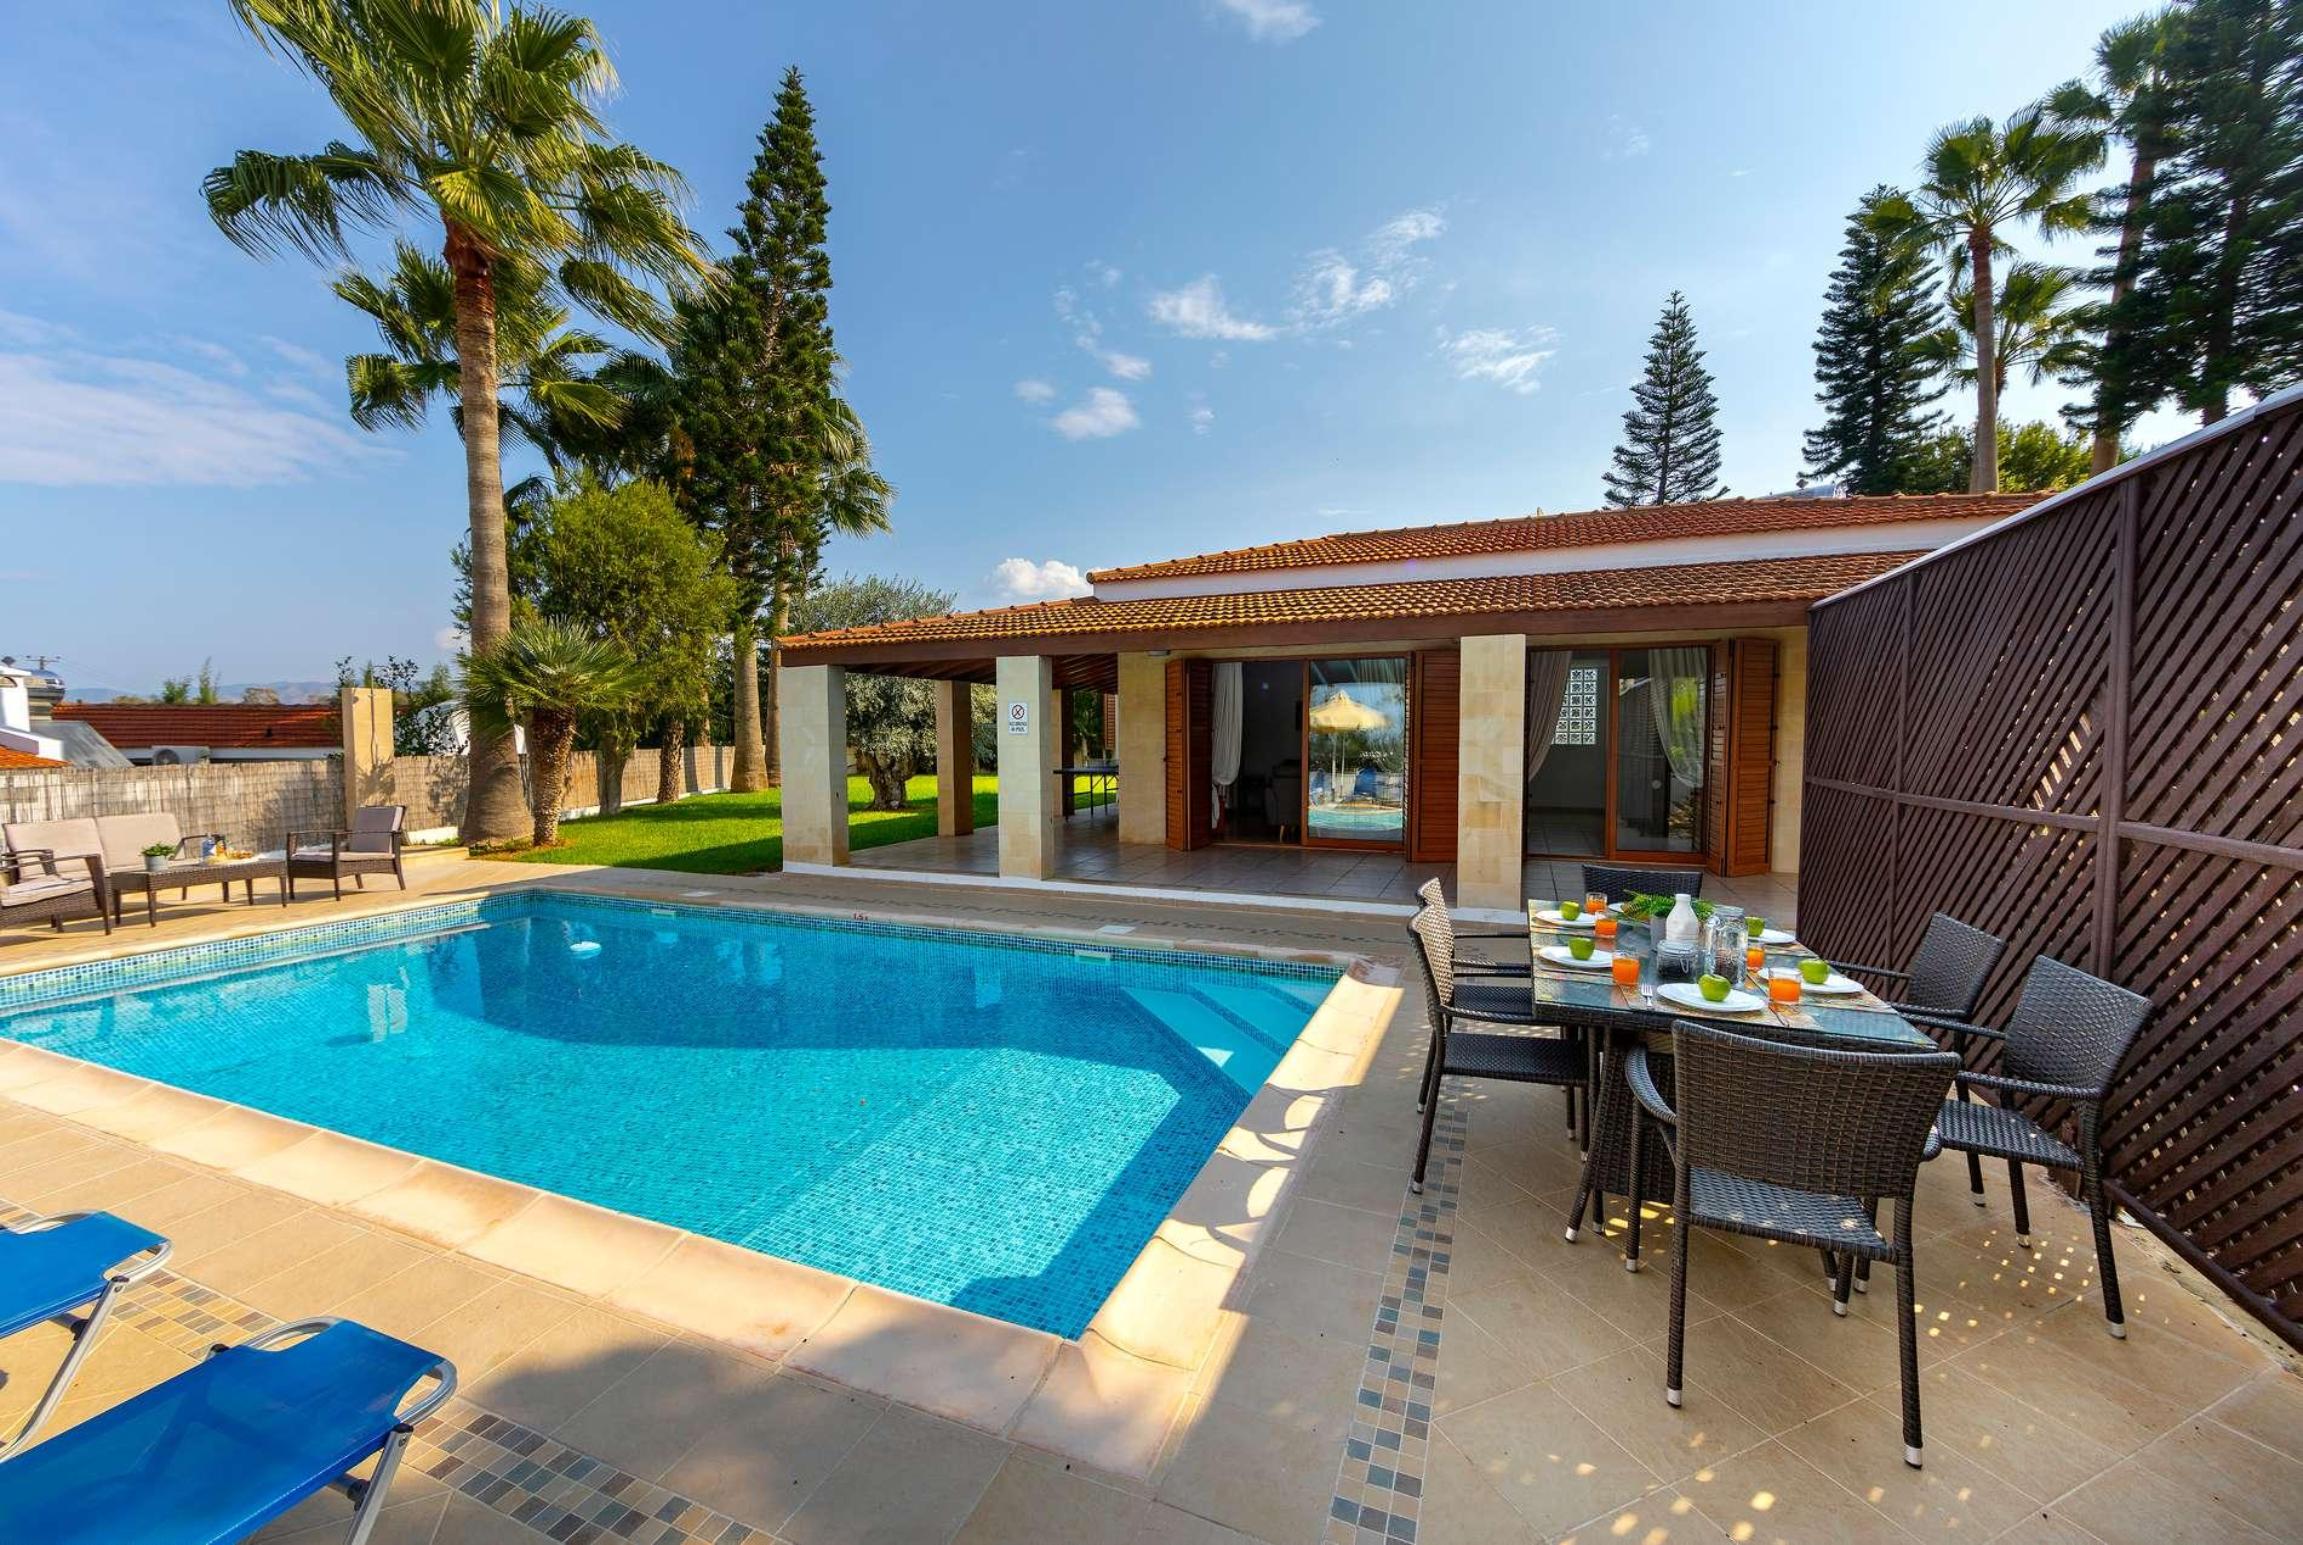 Property Image 1 - Airy villa with private pool, close to the shops